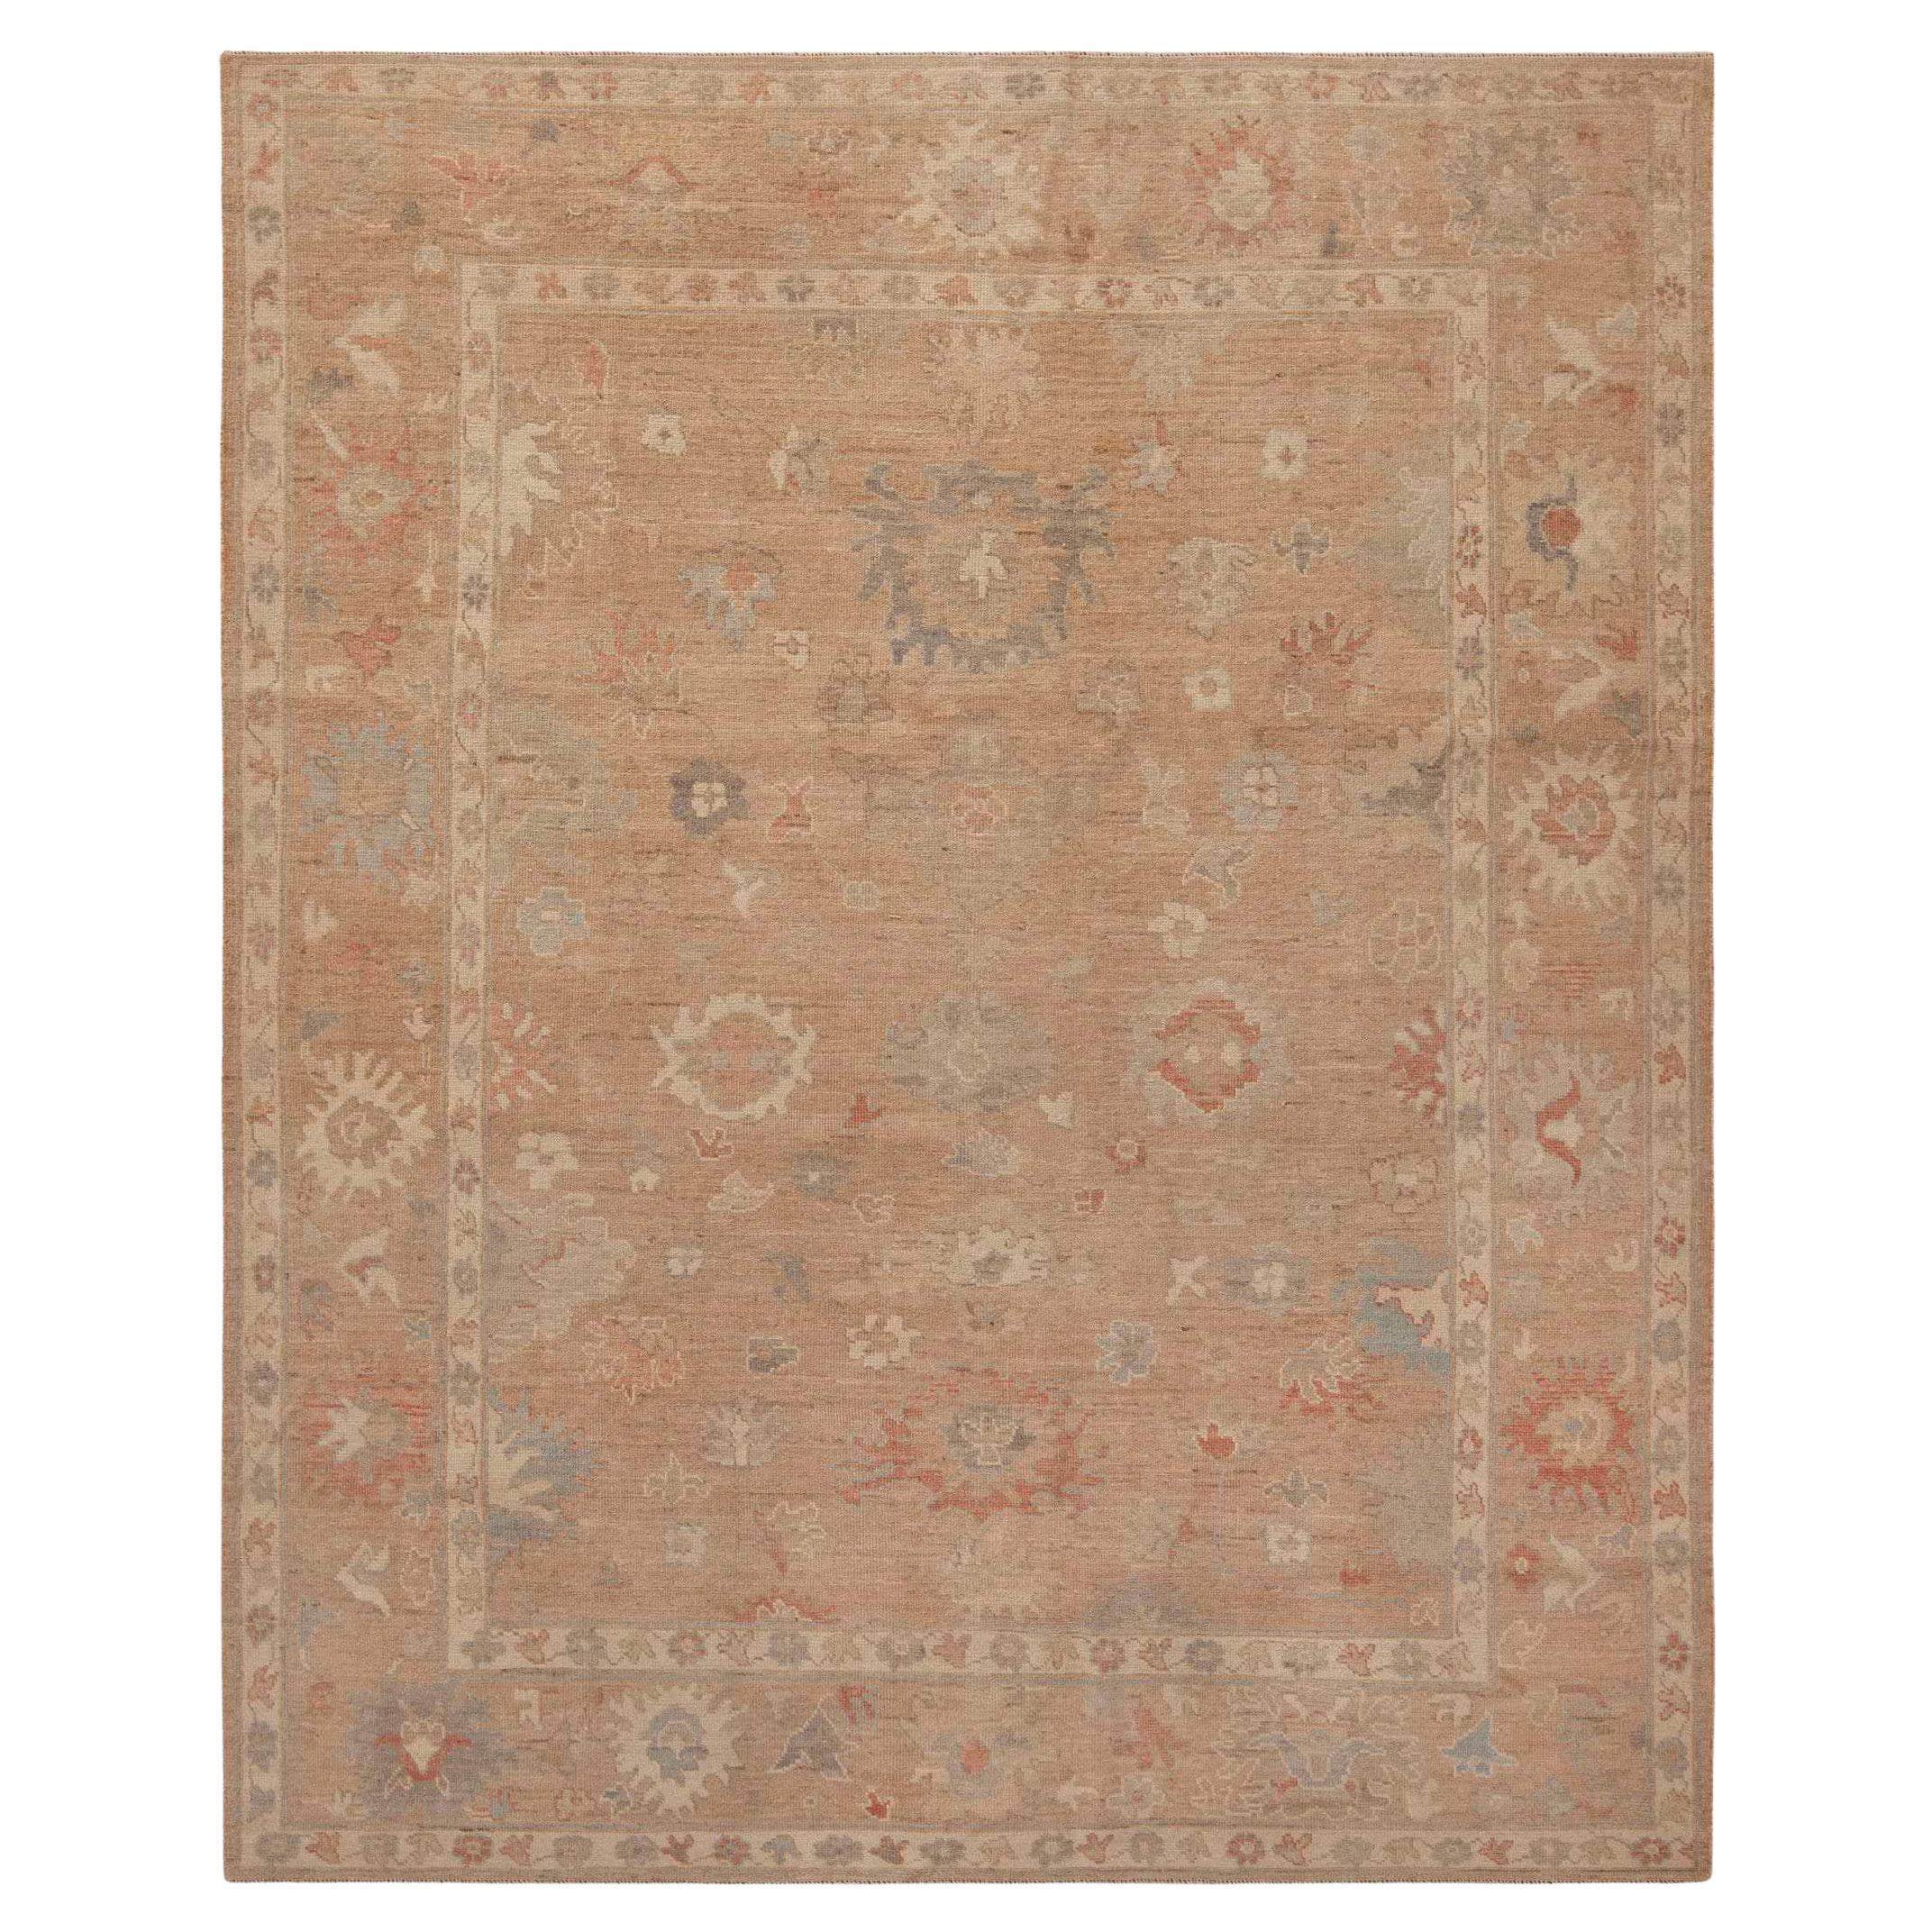 Nazmiyal Collection Earthy Modern Turkish Oushak Style Area Rug 7'7" x 9'5" For Sale